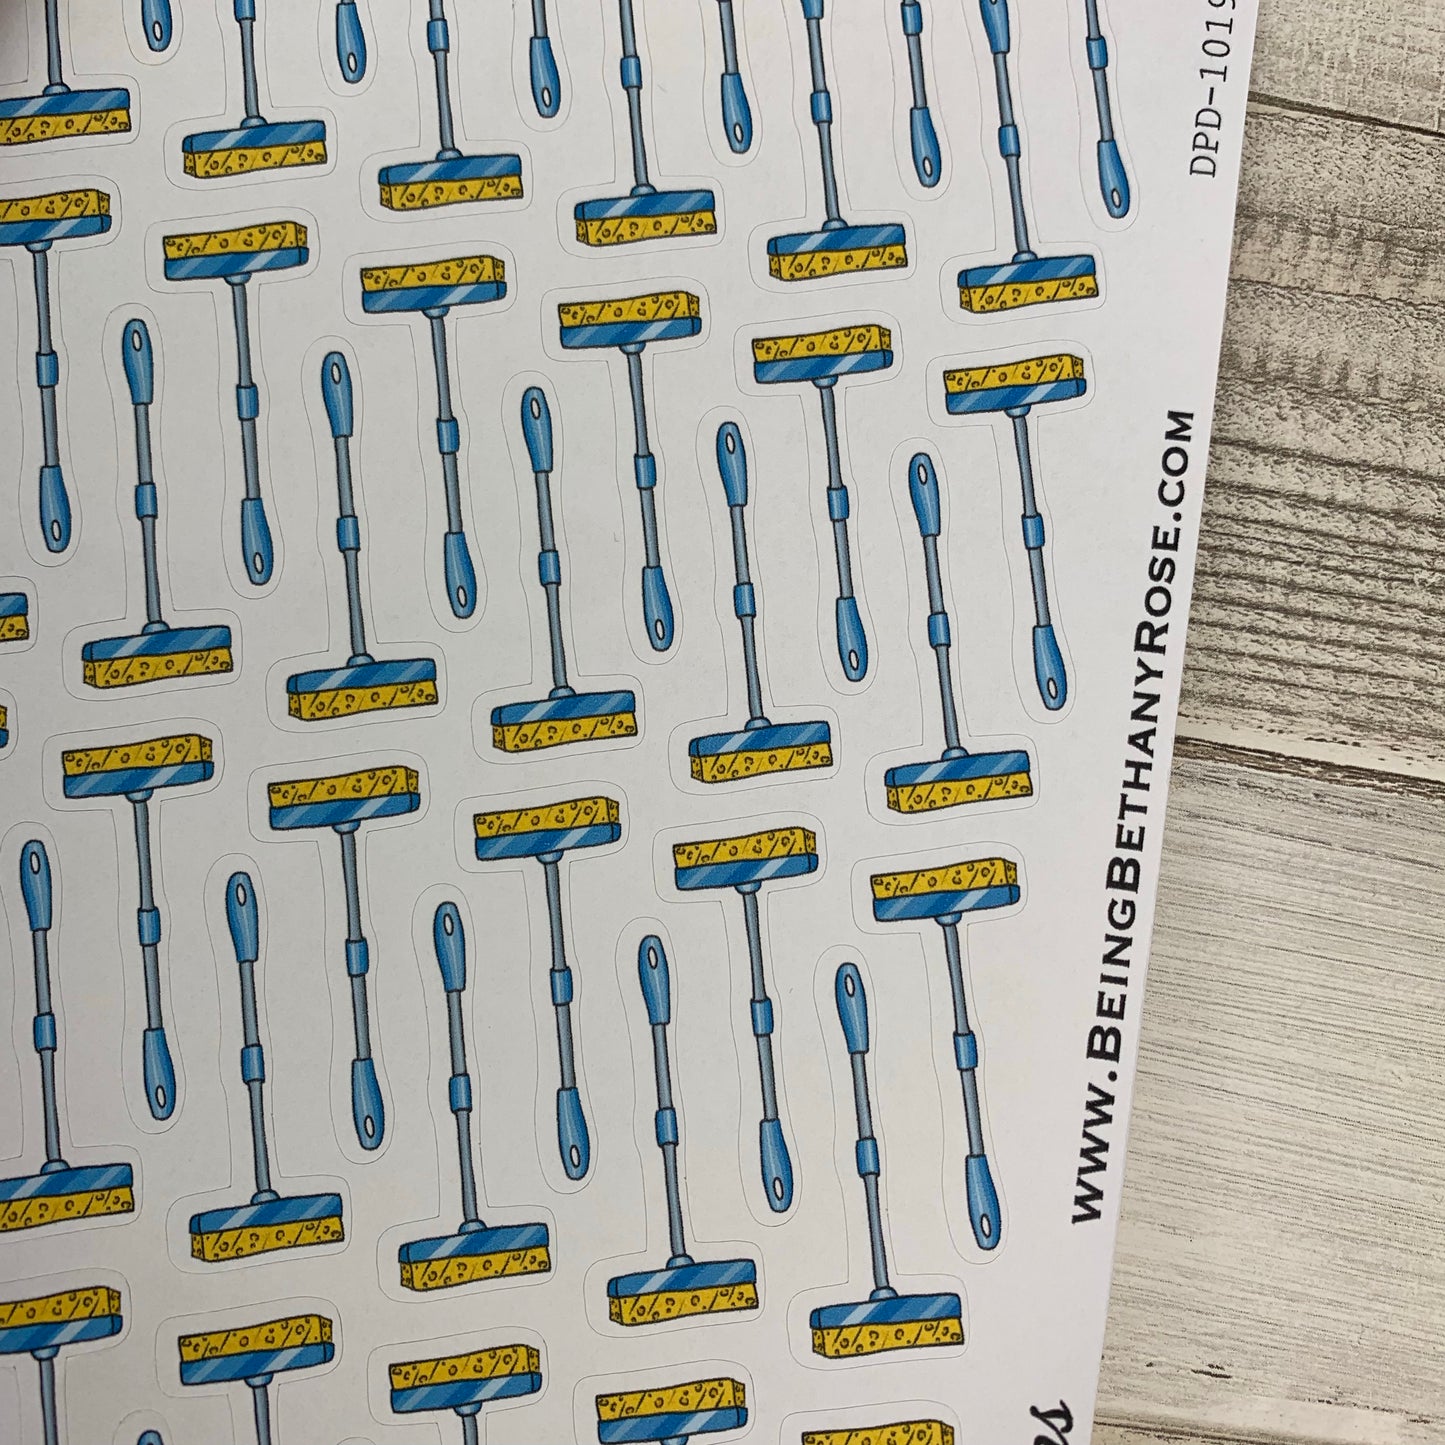 Realistic mop cleaning stickers  (DPD1019b)